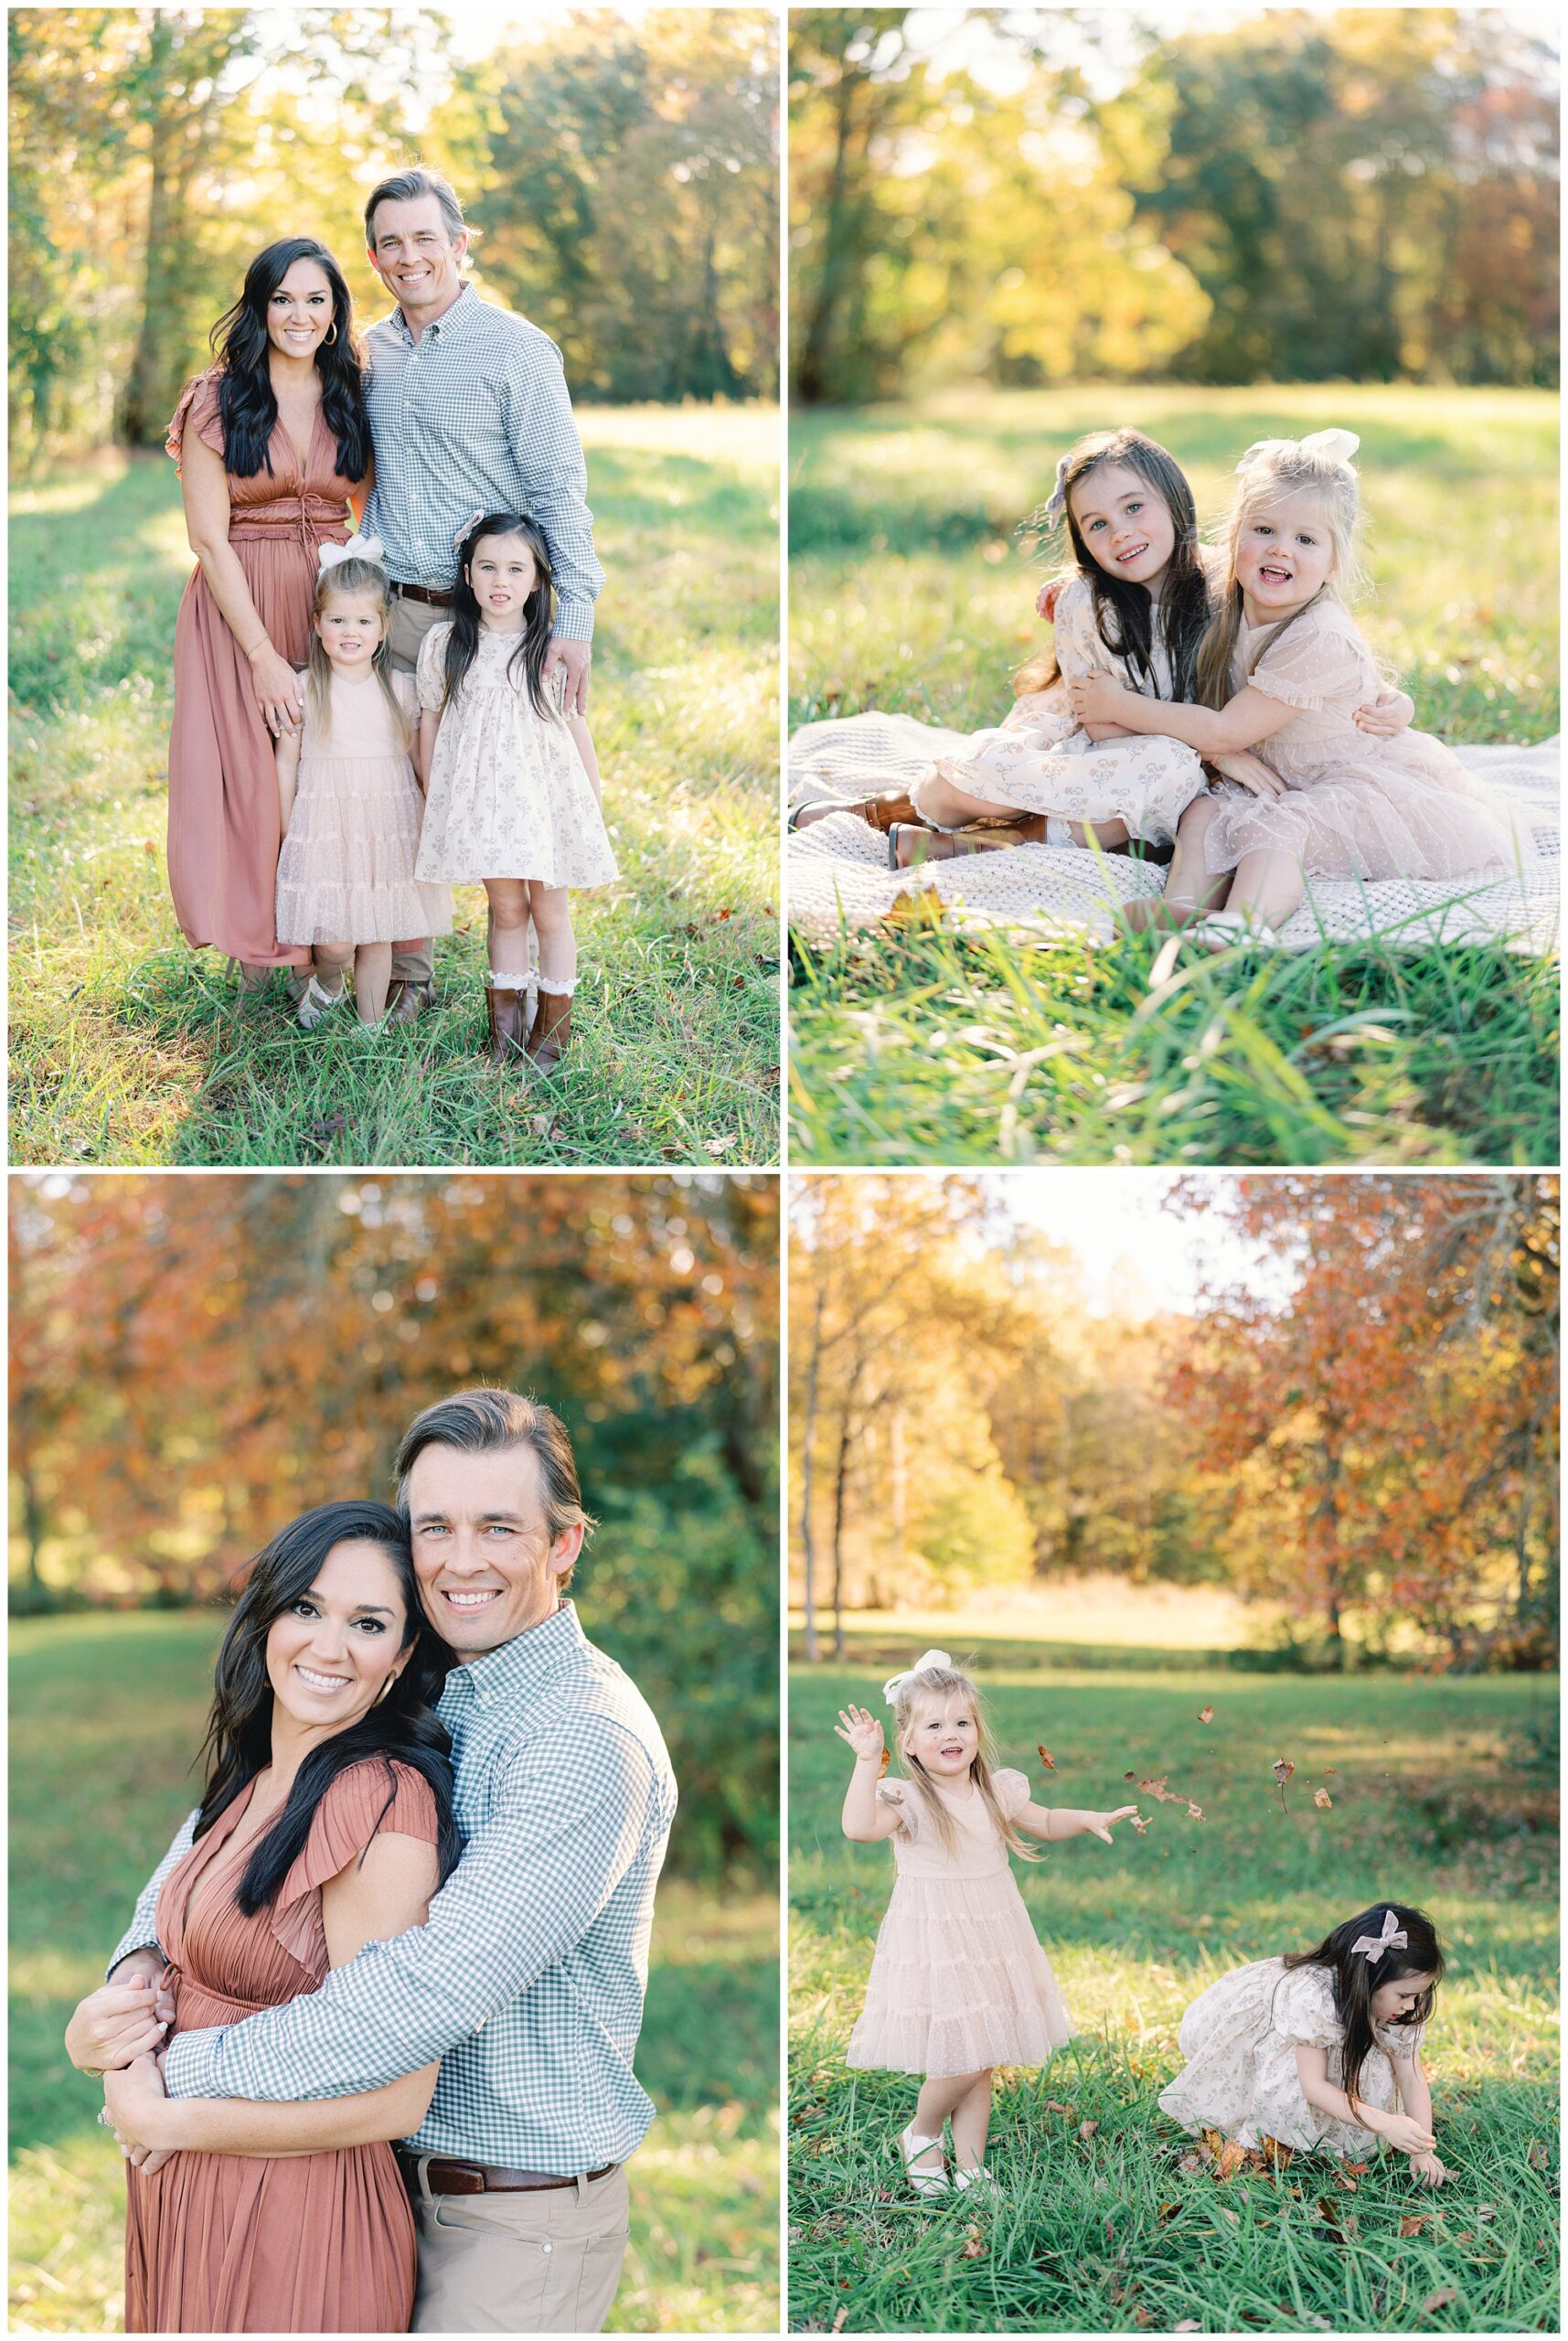 Atlanta fall mini portraits taken of a young family in a field of green grass lines by trees with yellow, red, and orange foliage by Grace Emily Photography.